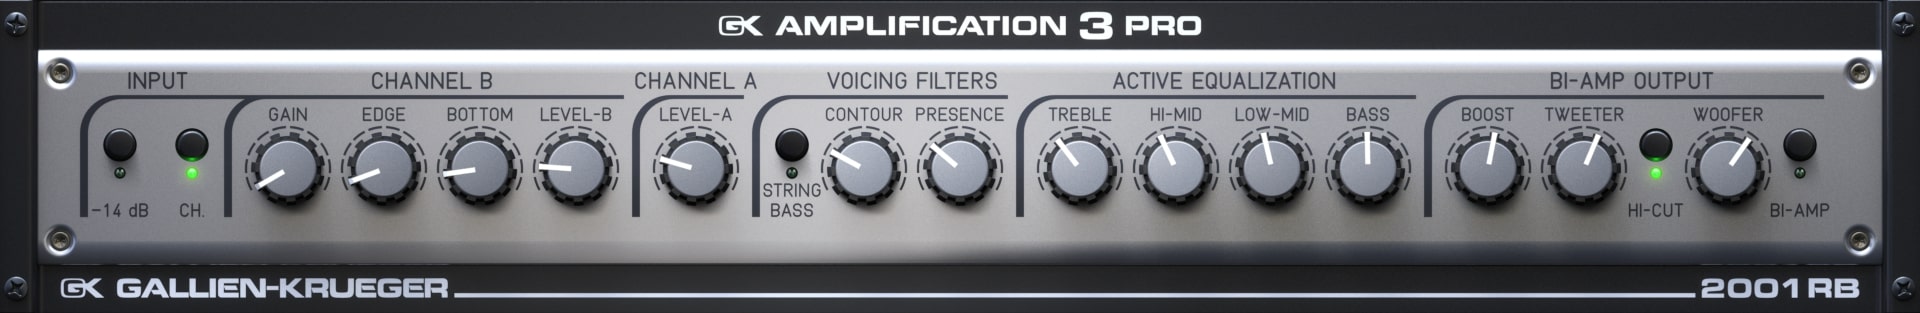 GK Amplification 3 Pro by Audified